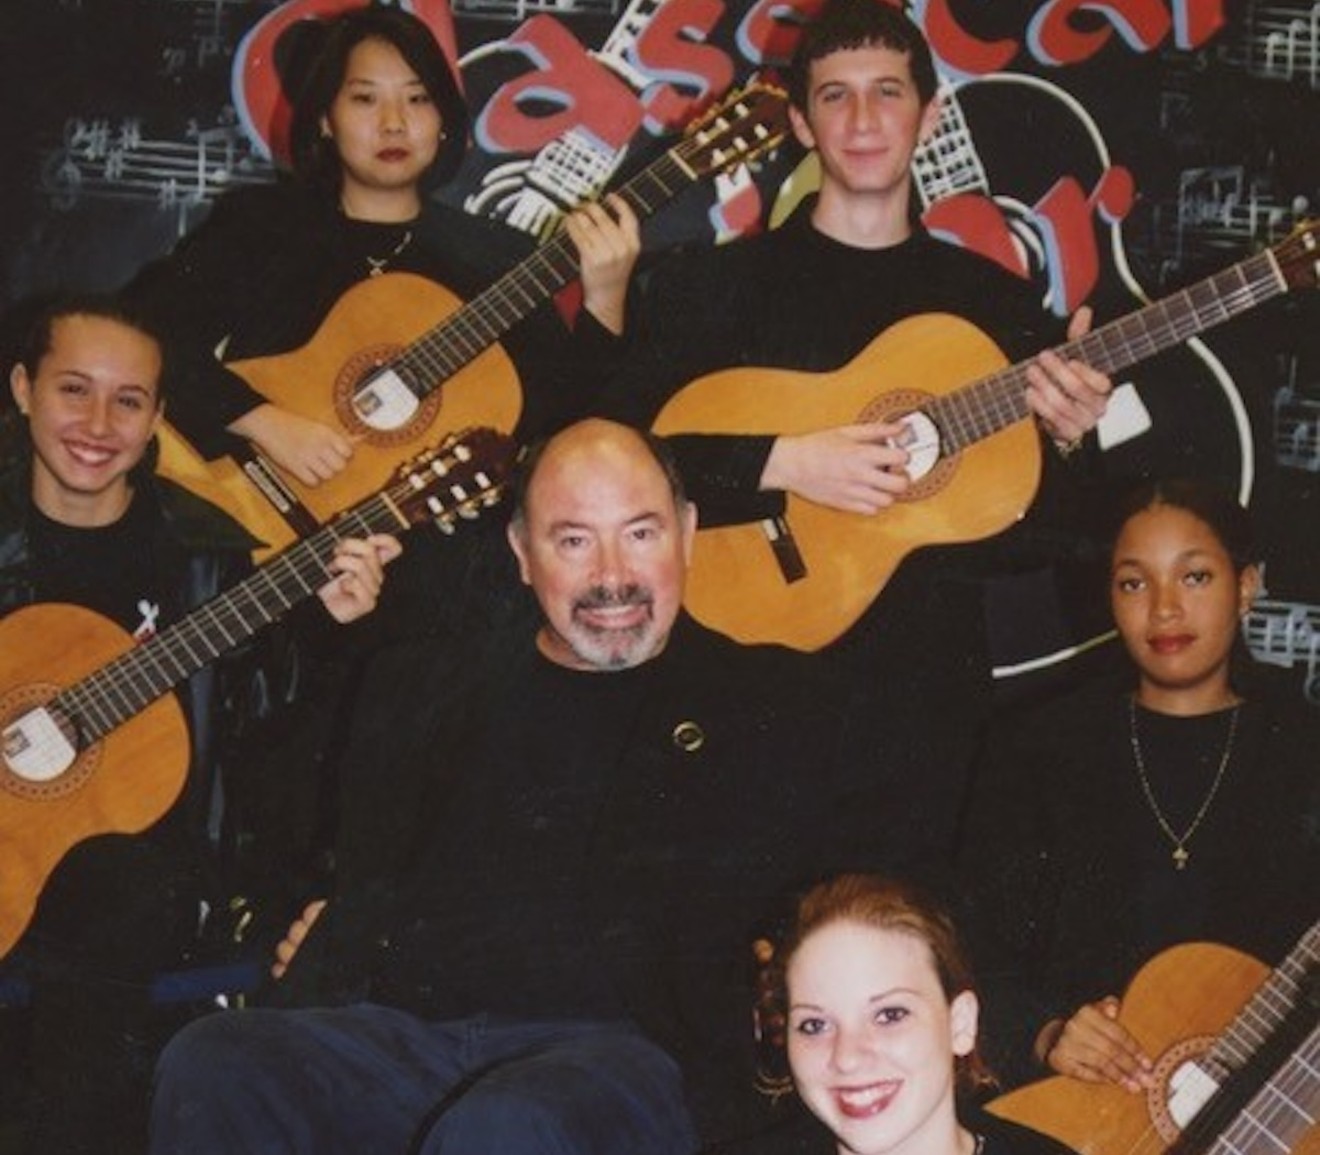 Despite his passing eight years ago, Doug Burris continues to be a source of inspiration to students taking part in the Miami Beach Rock Ensemble.